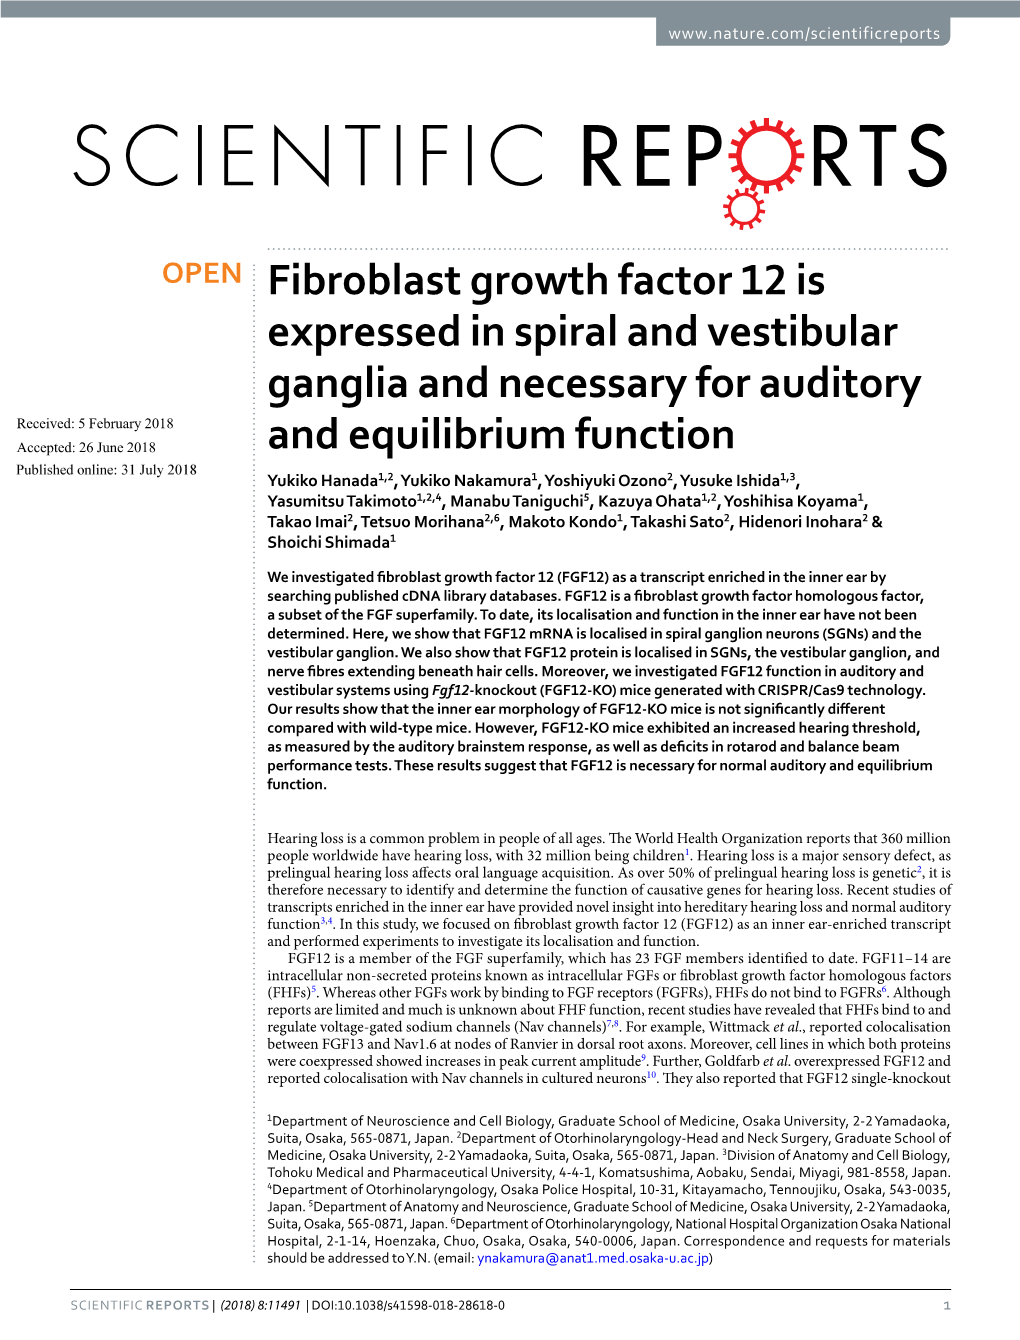 Fibroblast Growth Factor 12 Is Expressed in Spiral and Vestibular